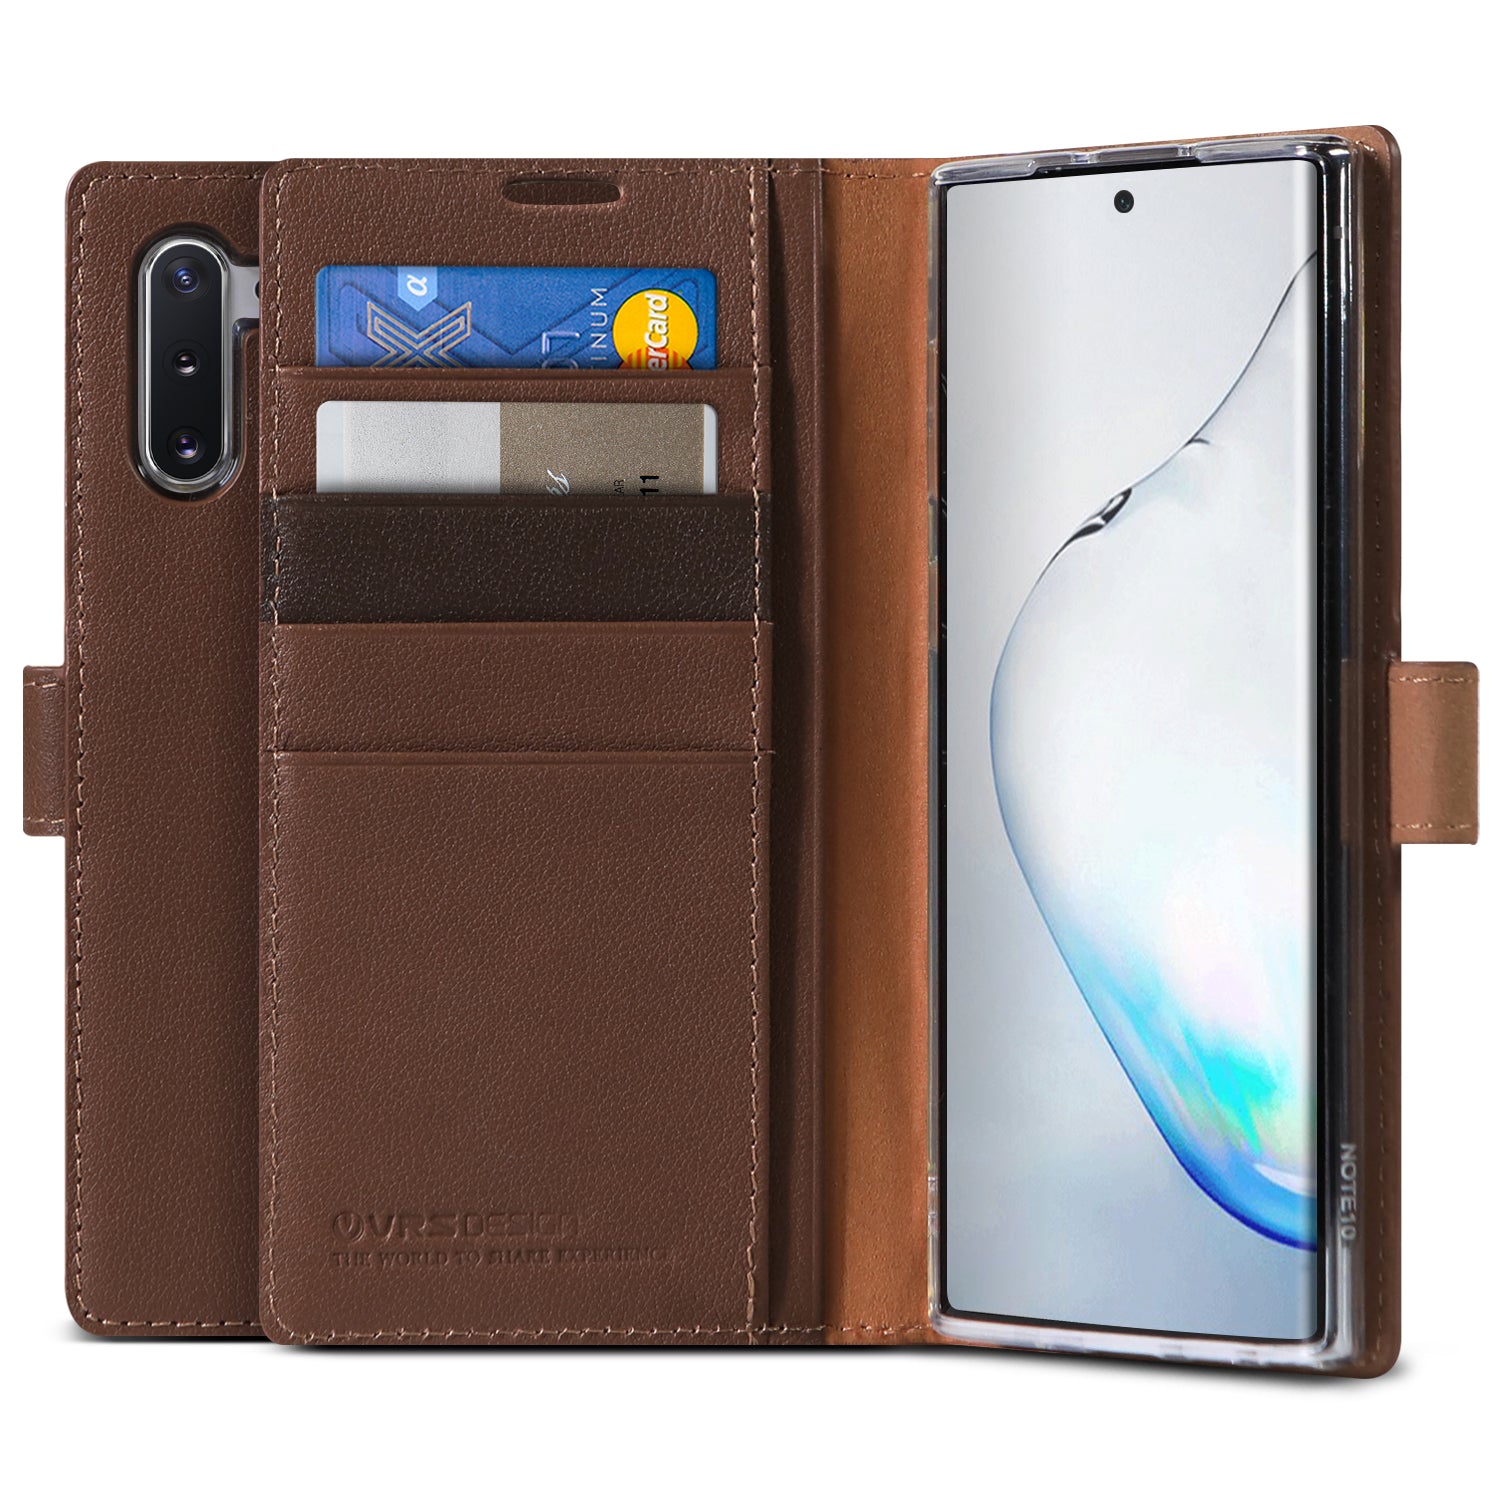 Samsung Galaxy Note 10 Plus wallet rugged case with multiple durable and convenient card slot with sleek minimalism by VRS